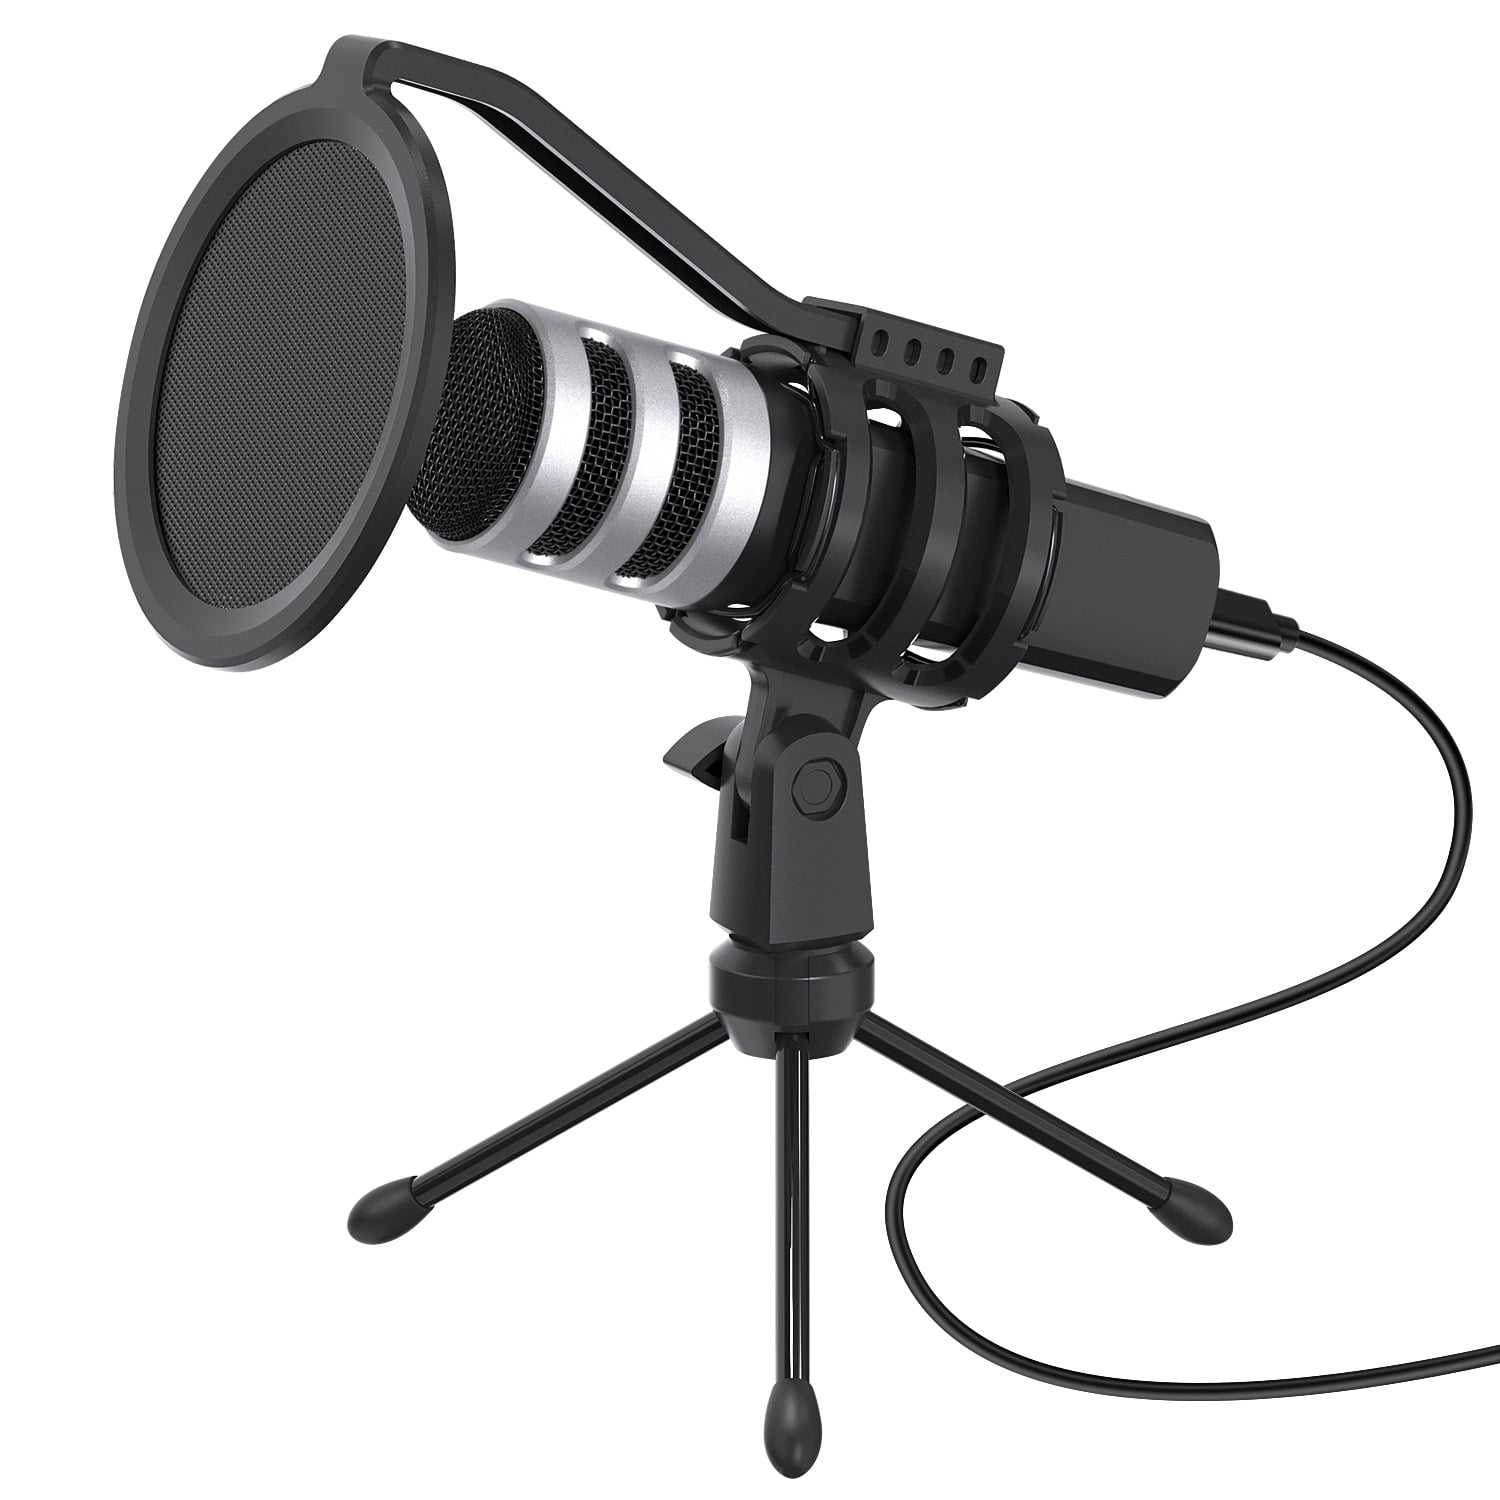 USB Microphone Kit 192KHz/24bit Condenser PC Mic Cardioid Studio Recording Vocal Microphone for Voice Overs Podcasting PC Gaming Streaming YouTube with Pop Filter, Tripod, Shock Mount - Walmart.com